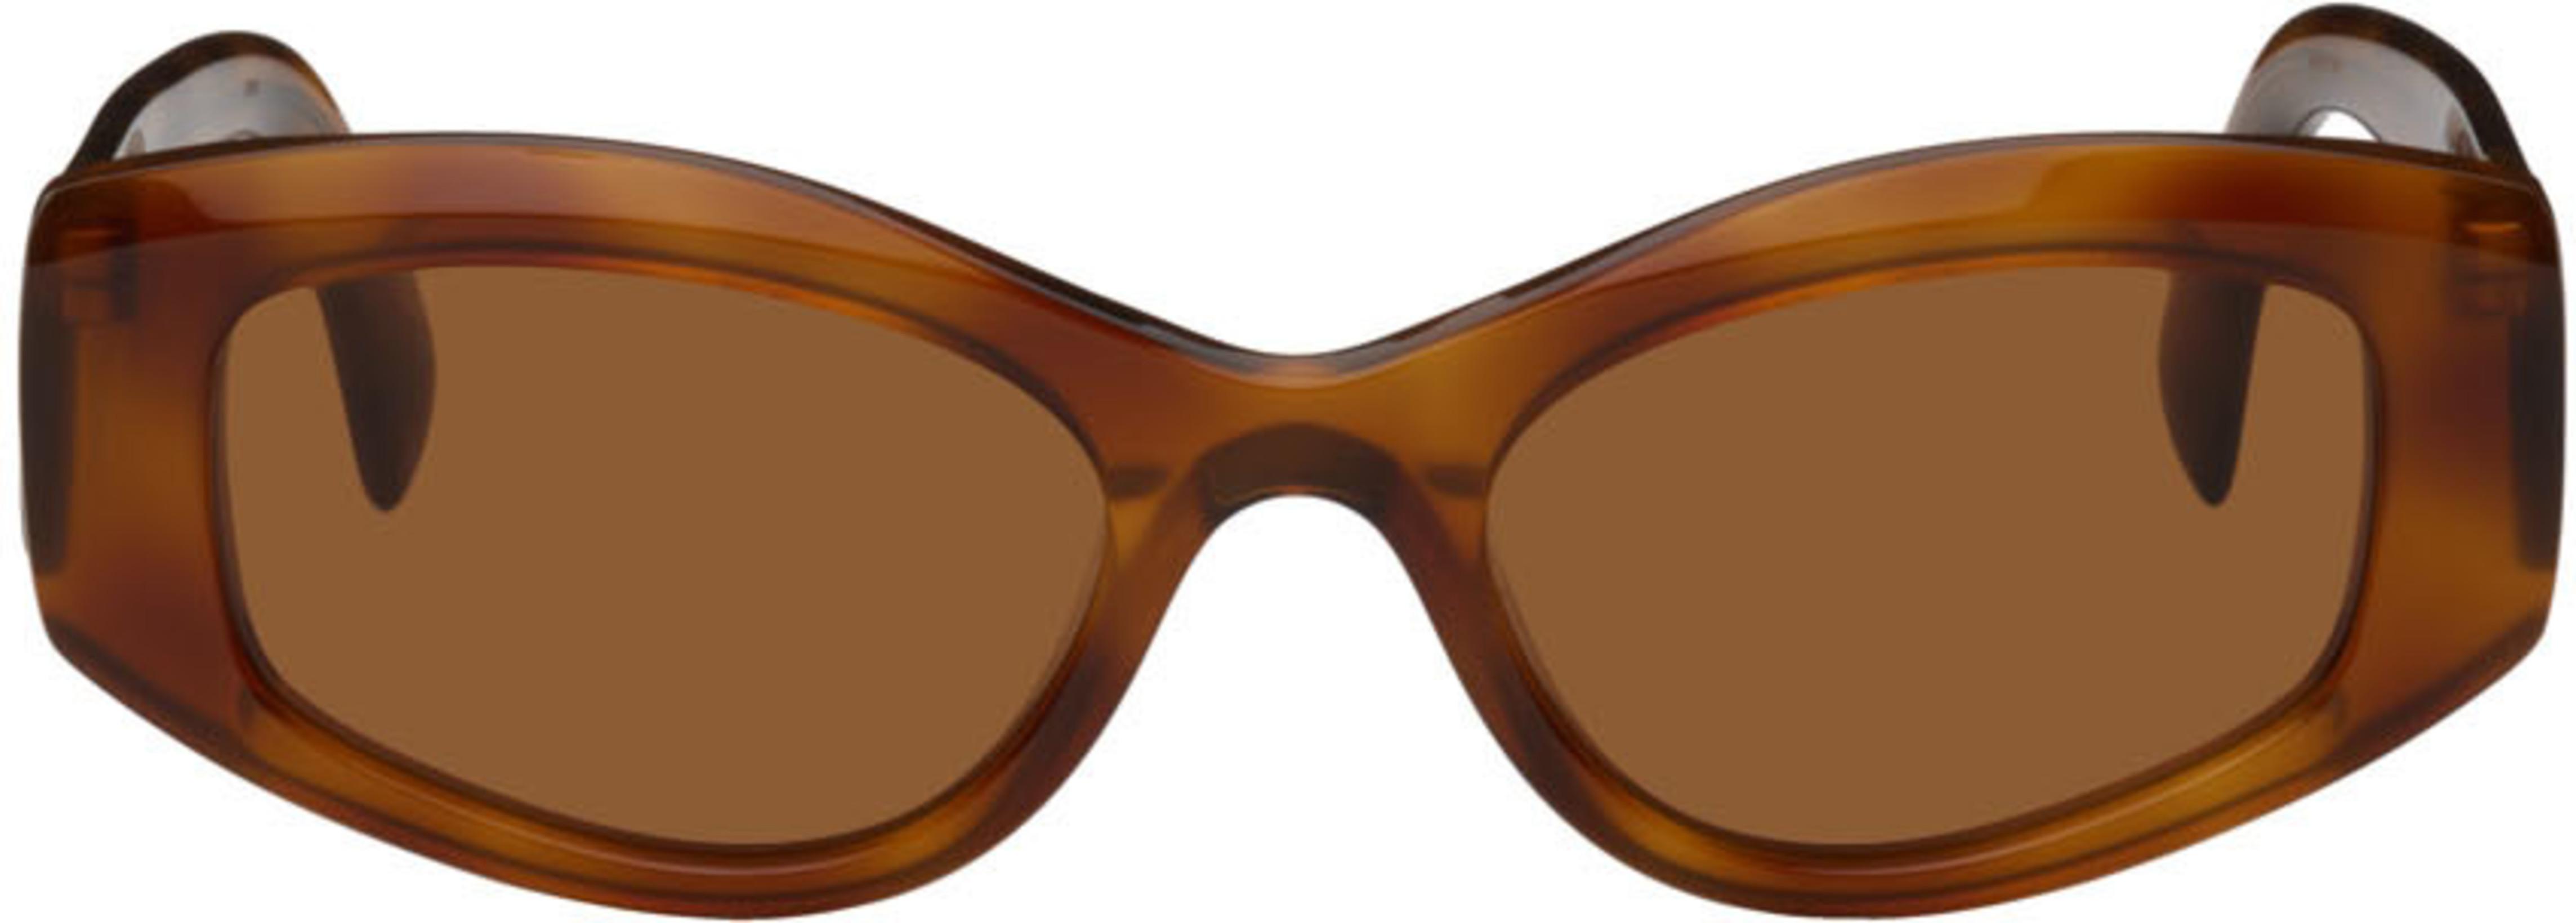 Brown Lab 2nd Sunglasses by CHIMI